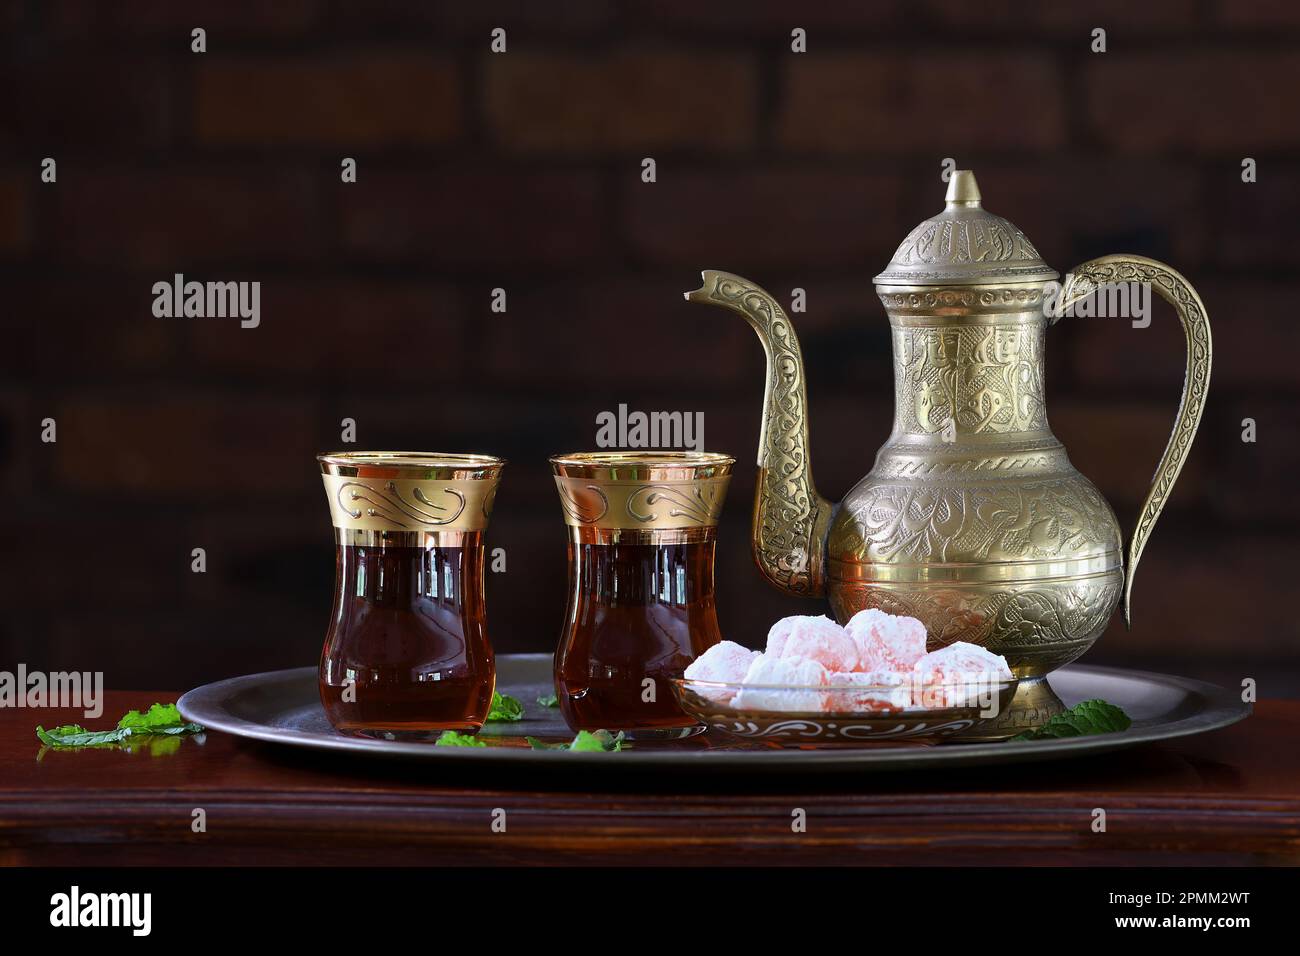 A classic, celebratory, ornate Turkish teapot, two glasses and traditional Turkish delights on a tray and wooden table in soft mood lighting Stock Photo